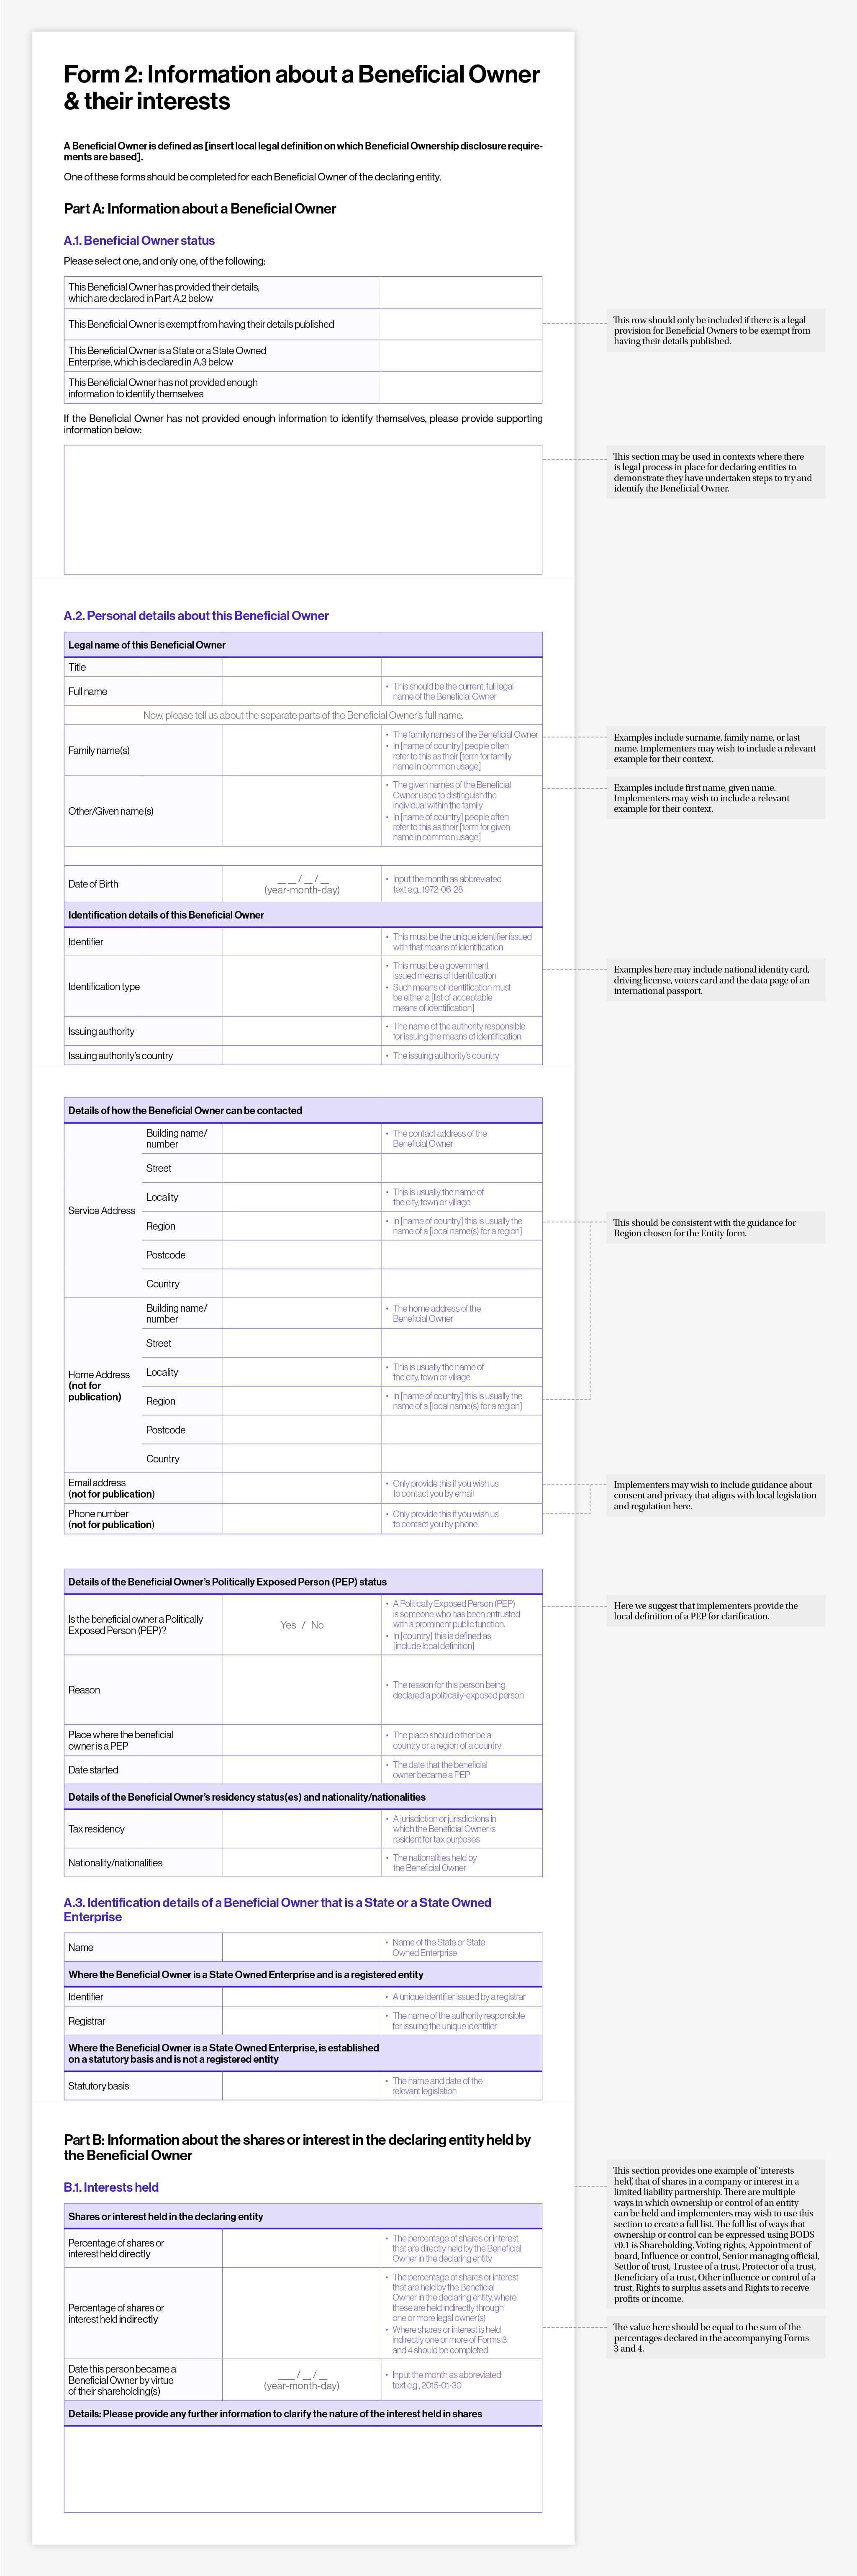 Example paper forms for collecting beneficial ownership data: Form 2